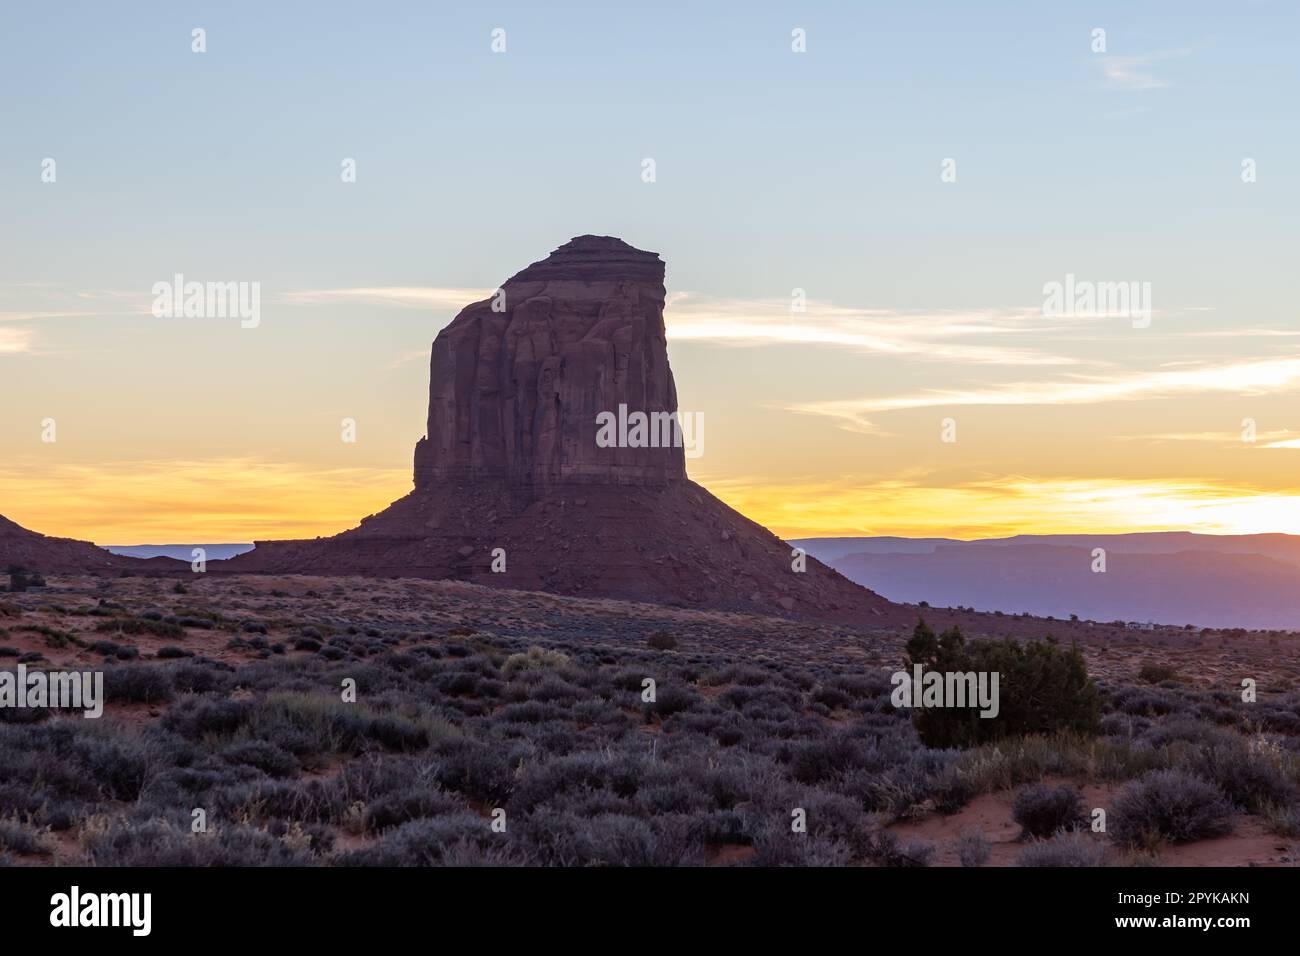 Monument Valley Landscape at Sunset - Gray Whiskers Butte Stock Photo